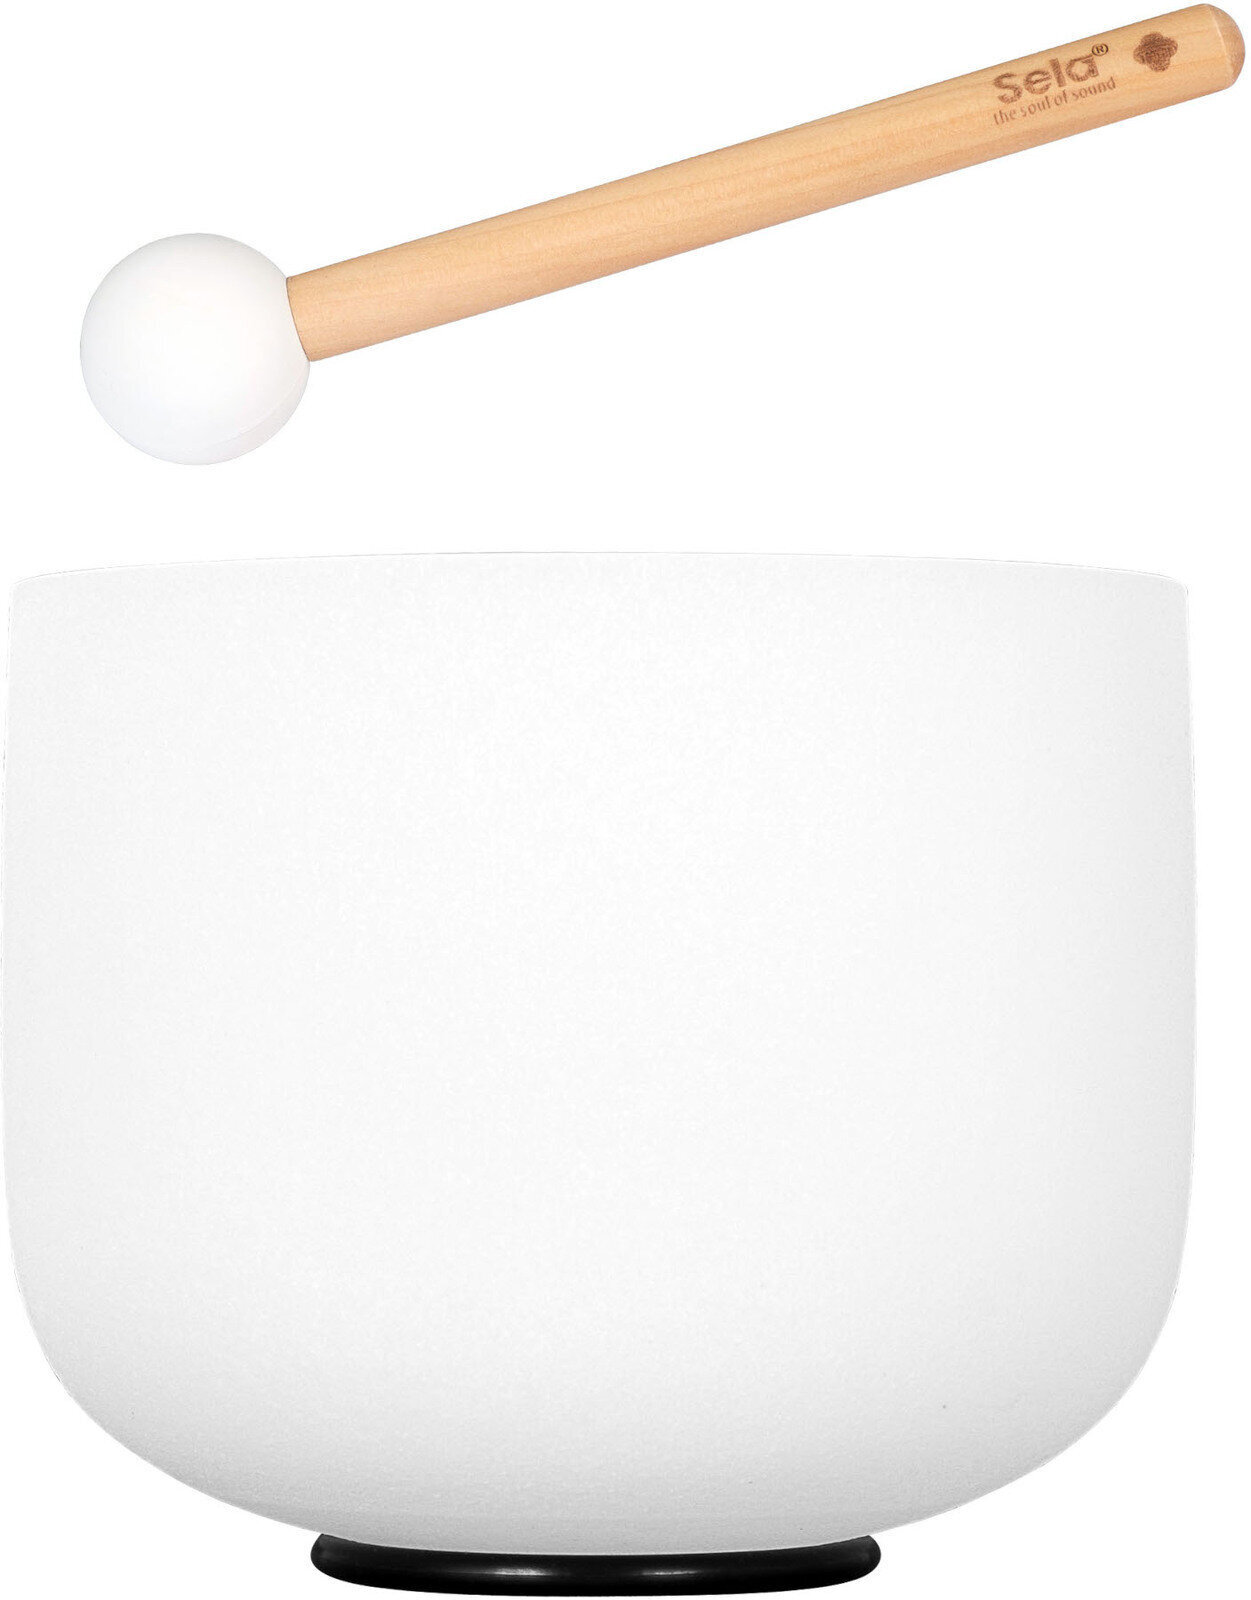 Percussions musicothérapeutiques Sela 8" Crystal Singing Bowl Frosted 432 Hz F incl. 1 Wood Mallet